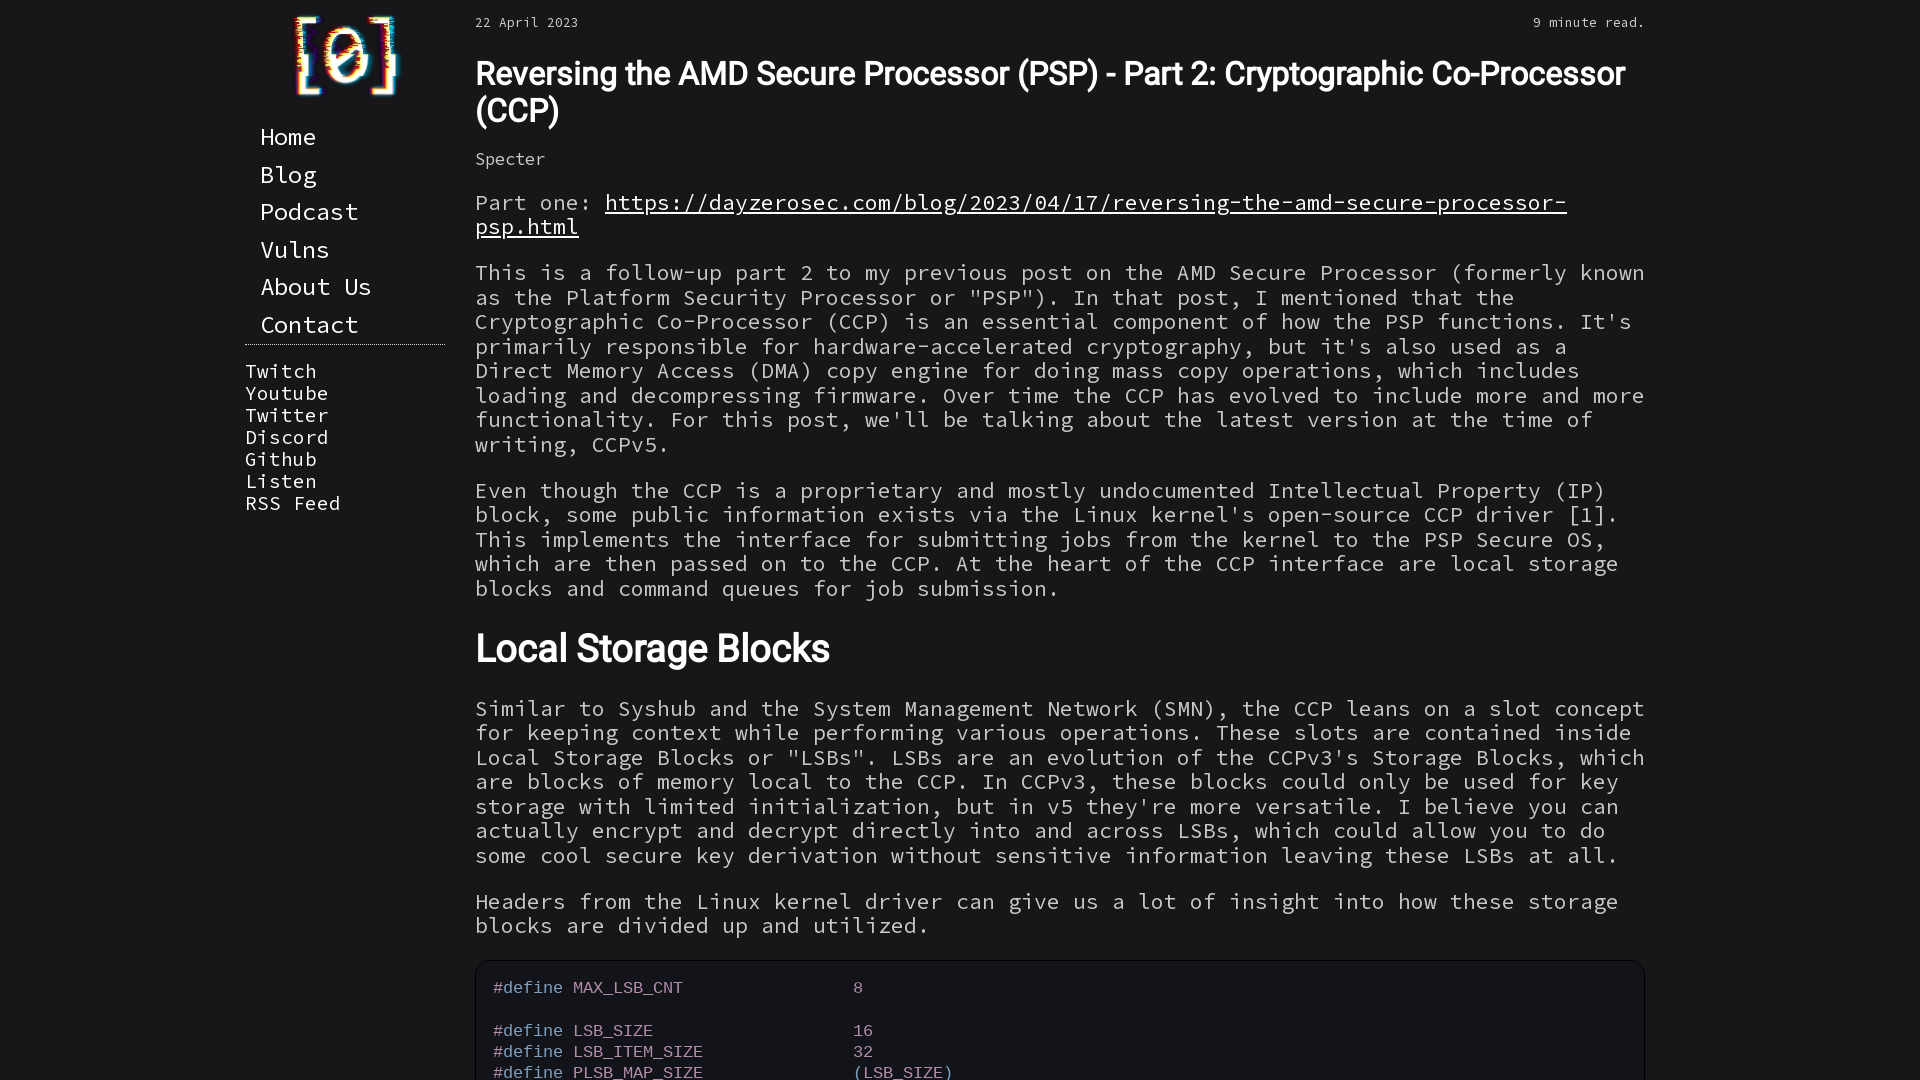 Reversing the AMD Secure Processor (PSP) - Part 2: Cryptographic Co-Processor (CCP)